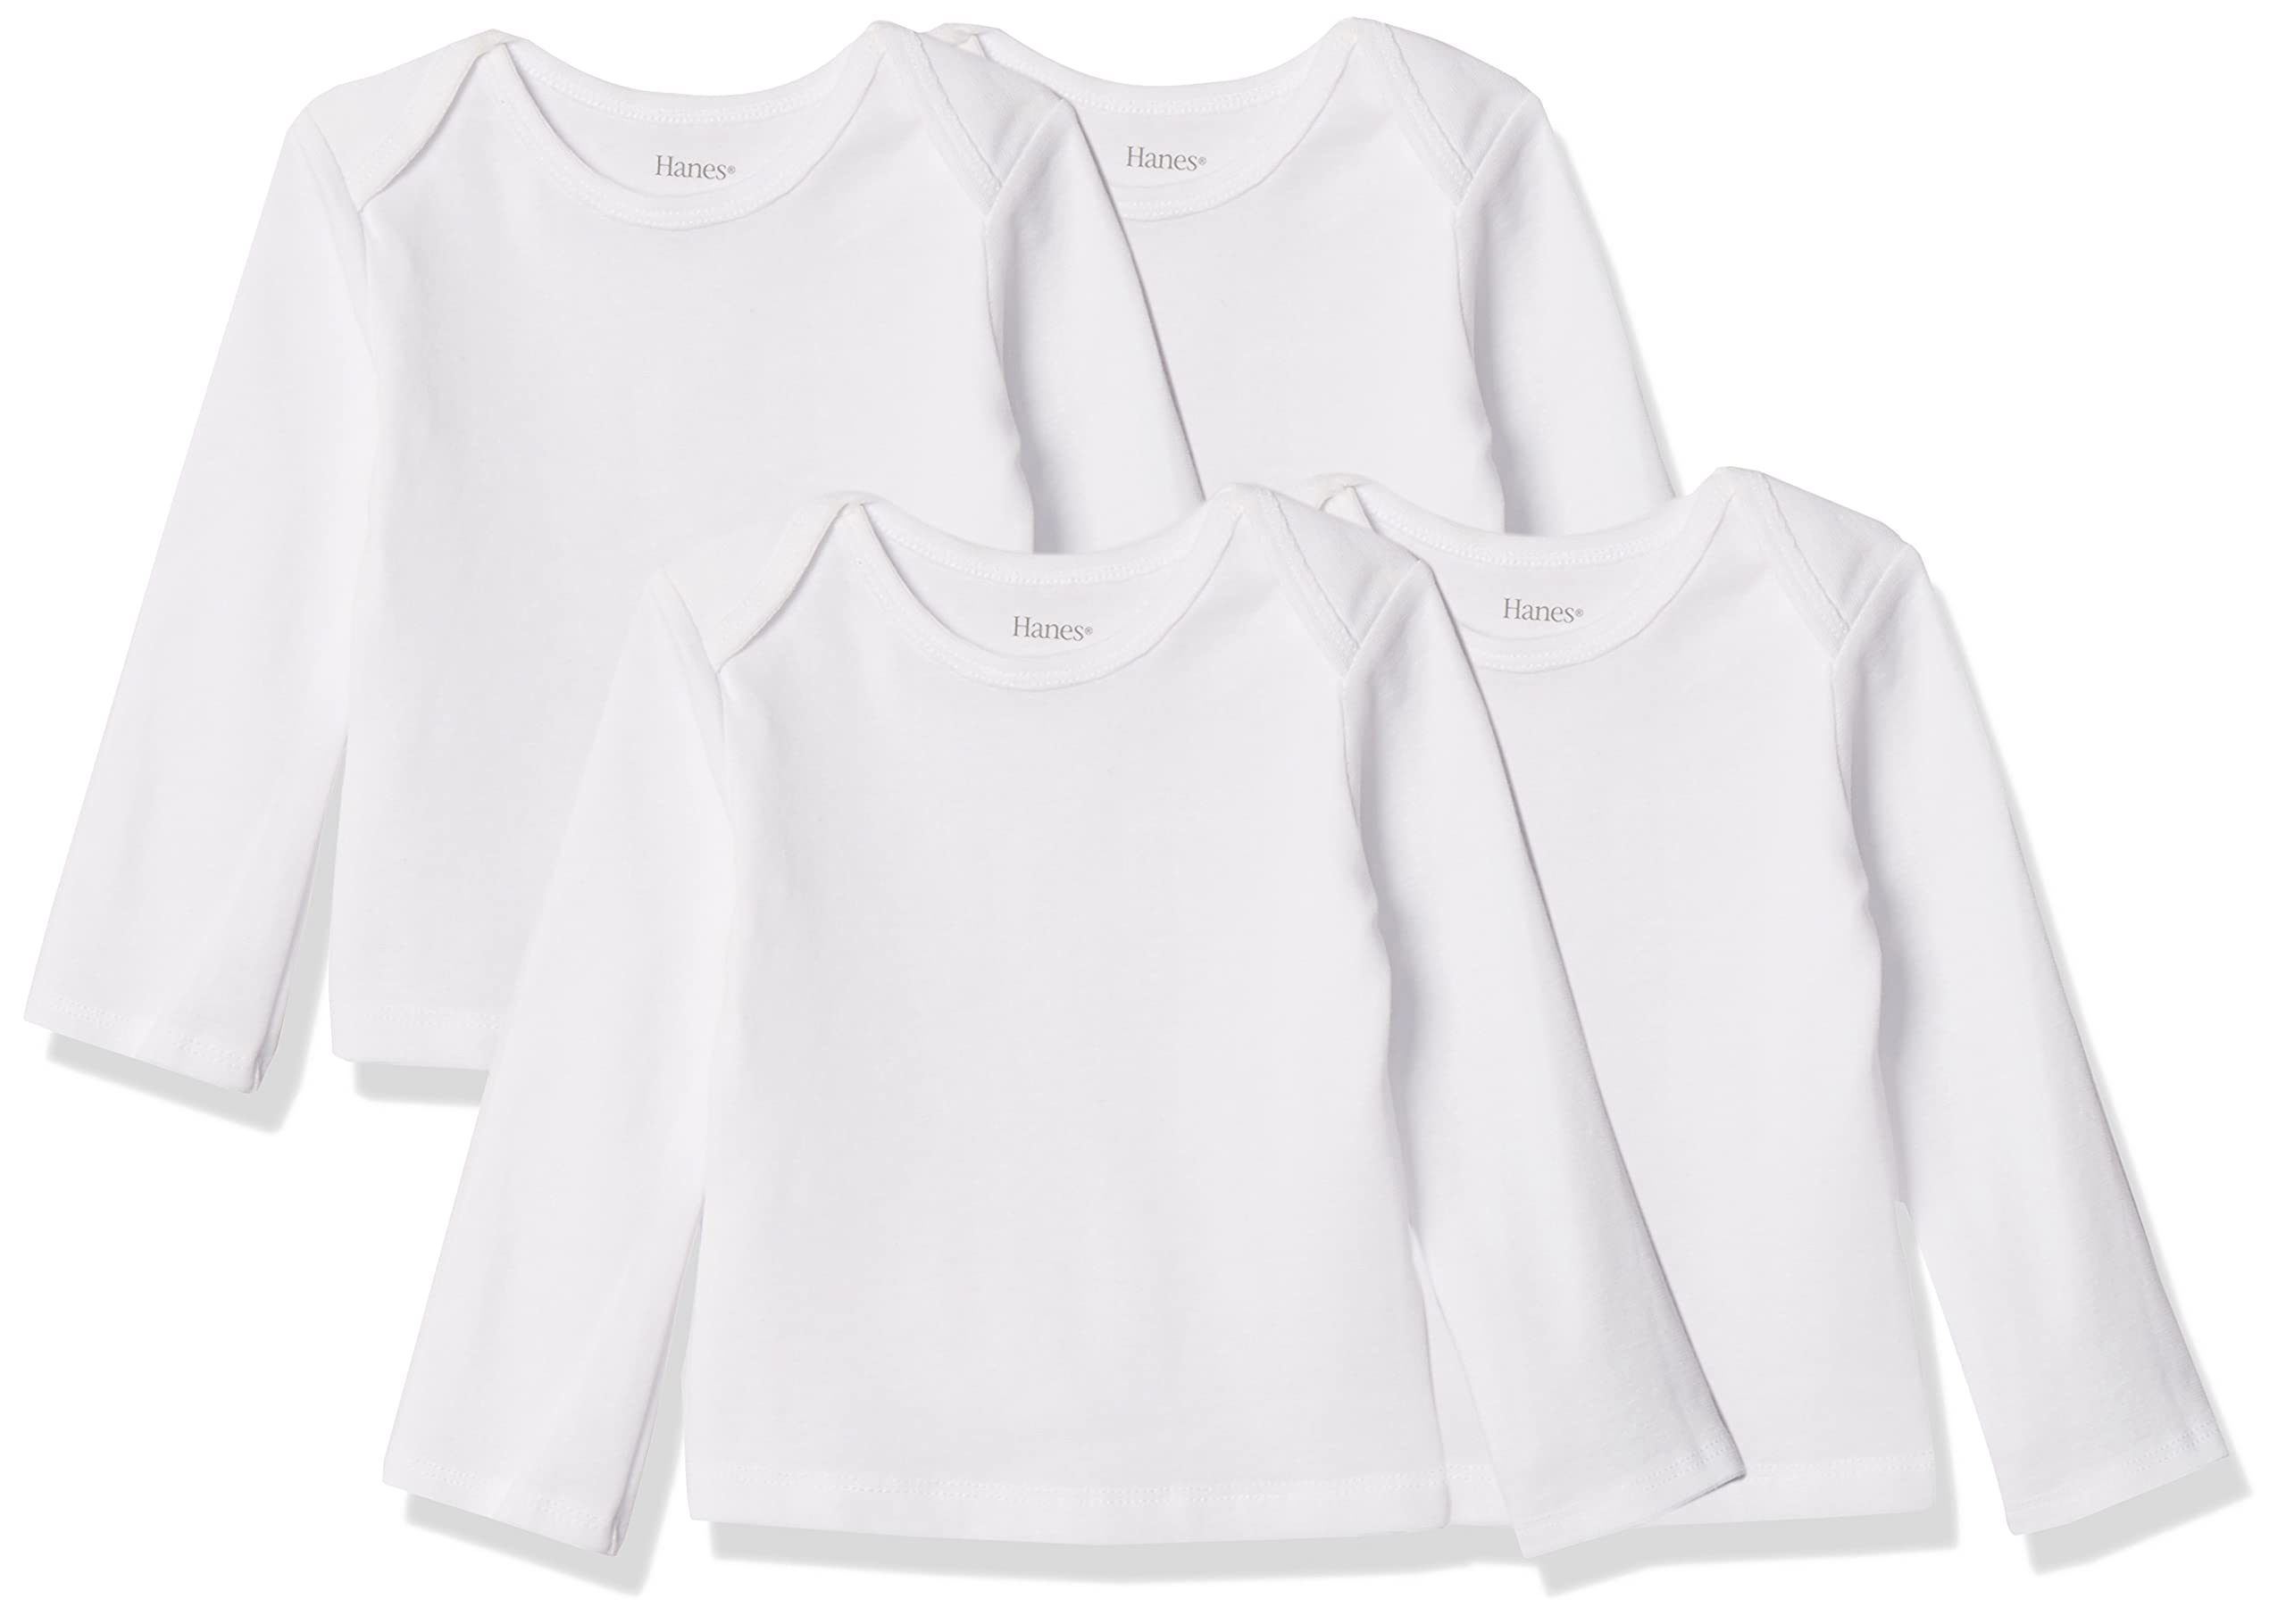 Hanes Baby Long Sleeve T-shirt, Ultimate Flexy Knit Tee for Boys & Girls, 4-Pack